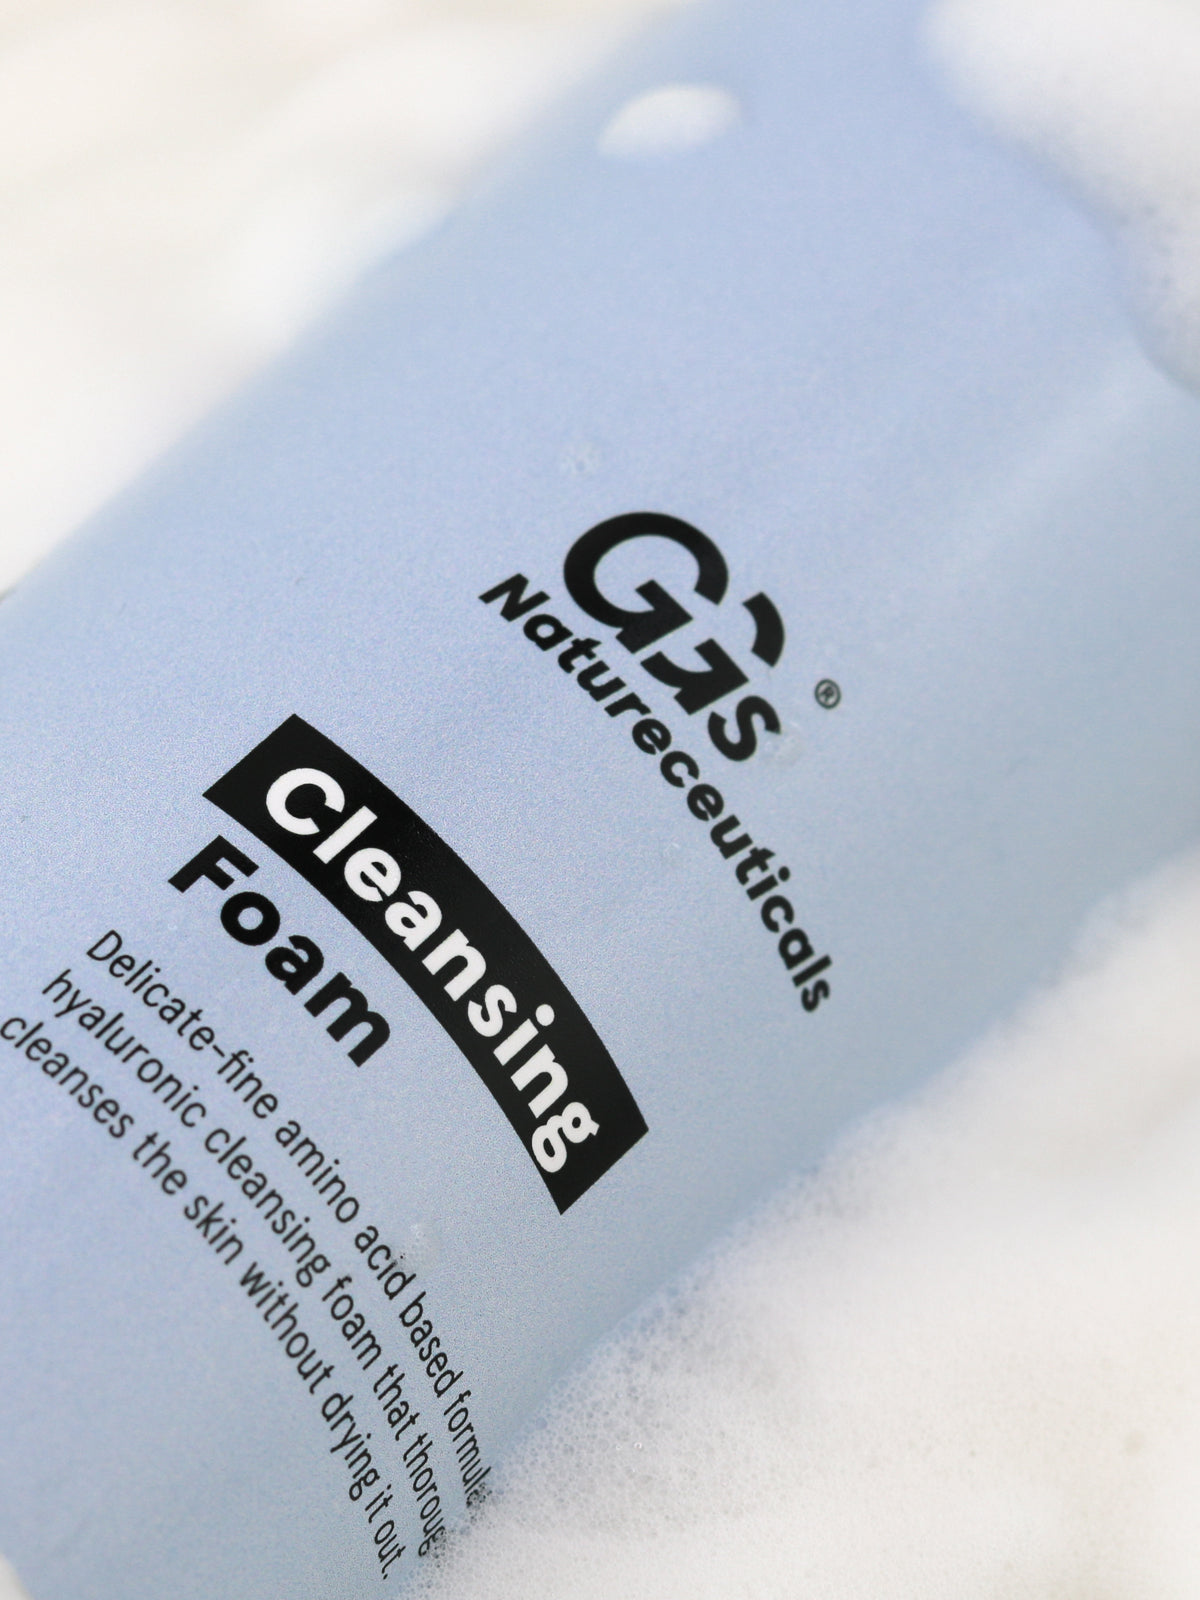 Hyaluronic Cleansing Foam | GGs Natureceuticals